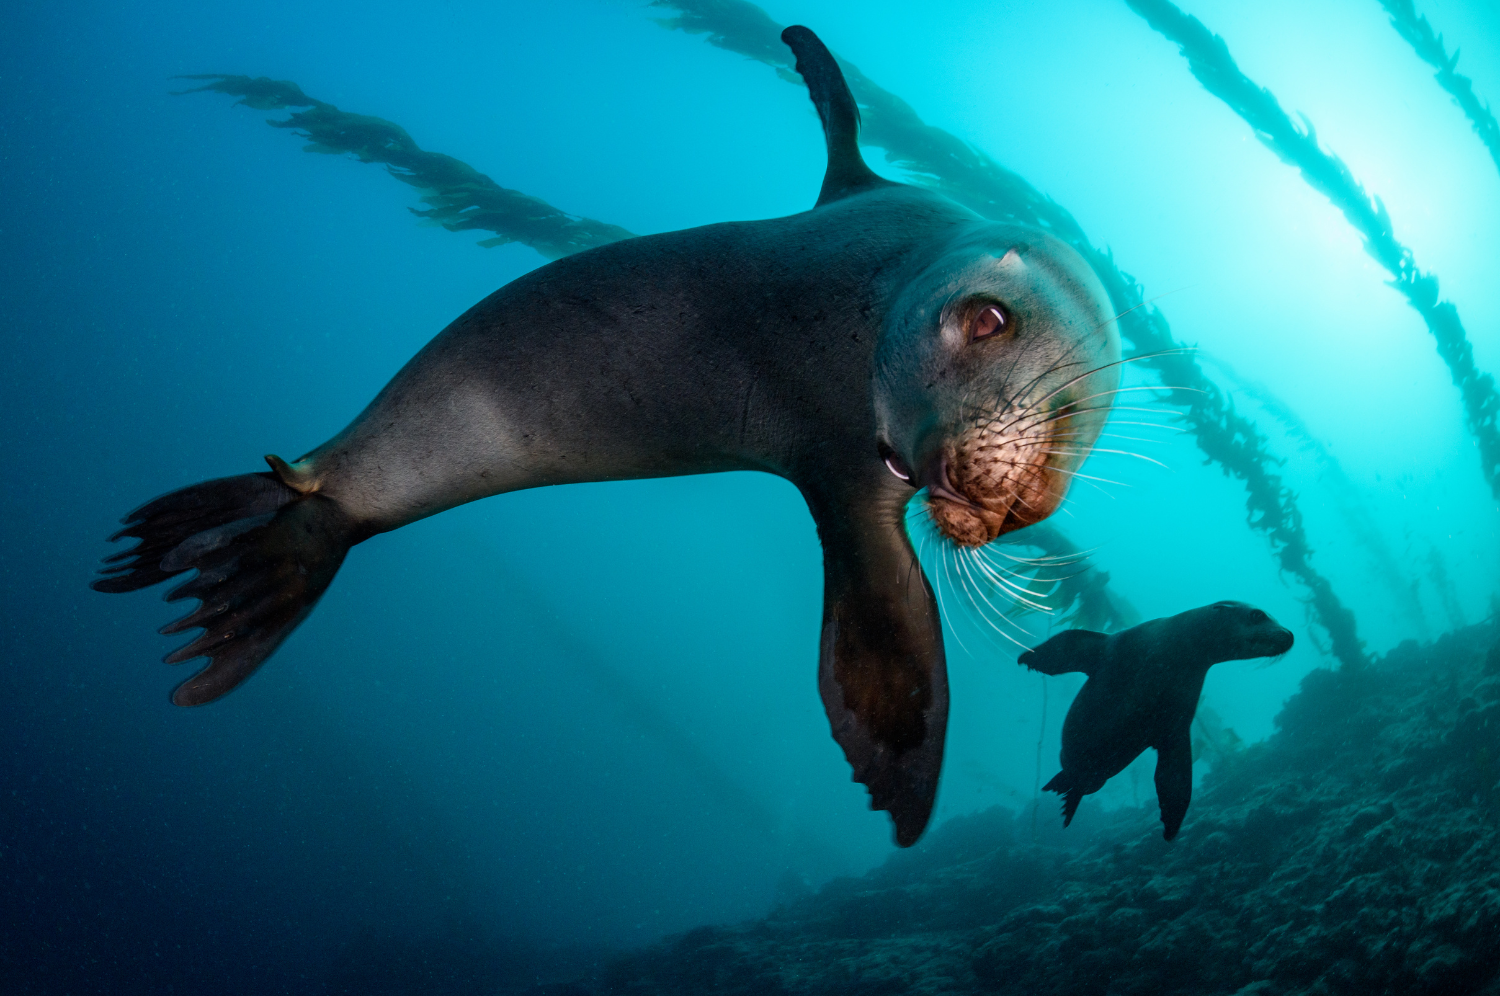 Underwater image of playful sea lions.